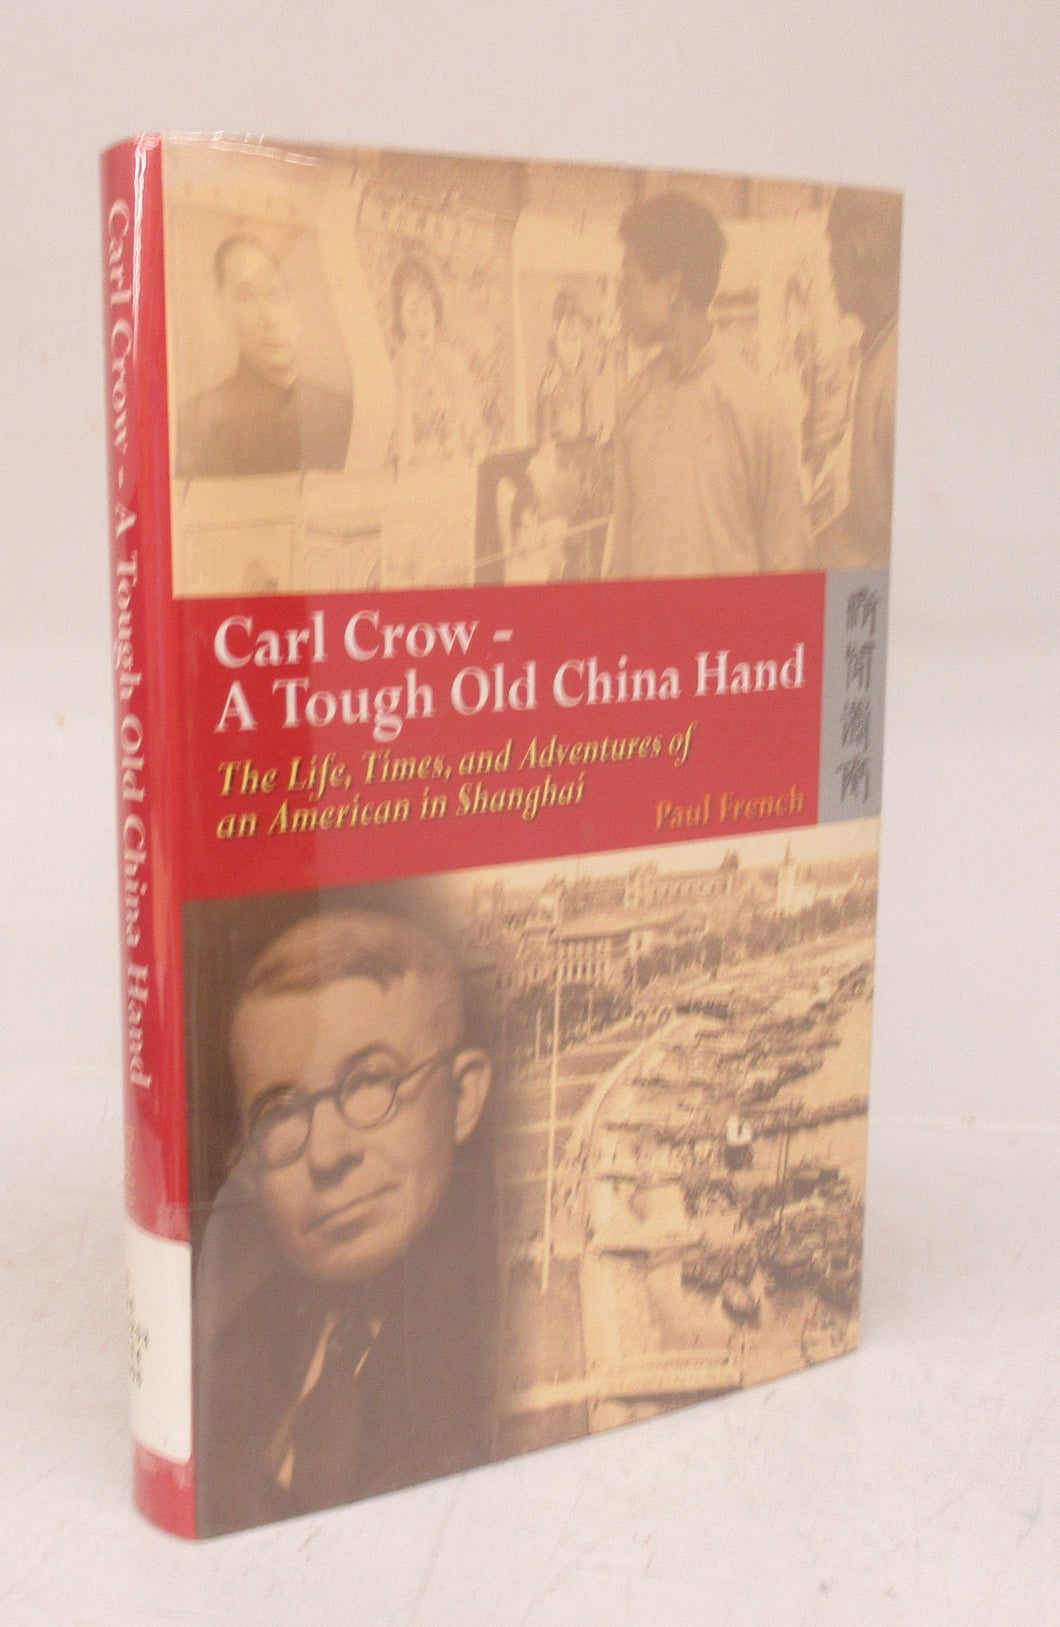 Carl Crow - A Tough Old China Hand. The Life, Times, and Adventures of an American in Shanghai